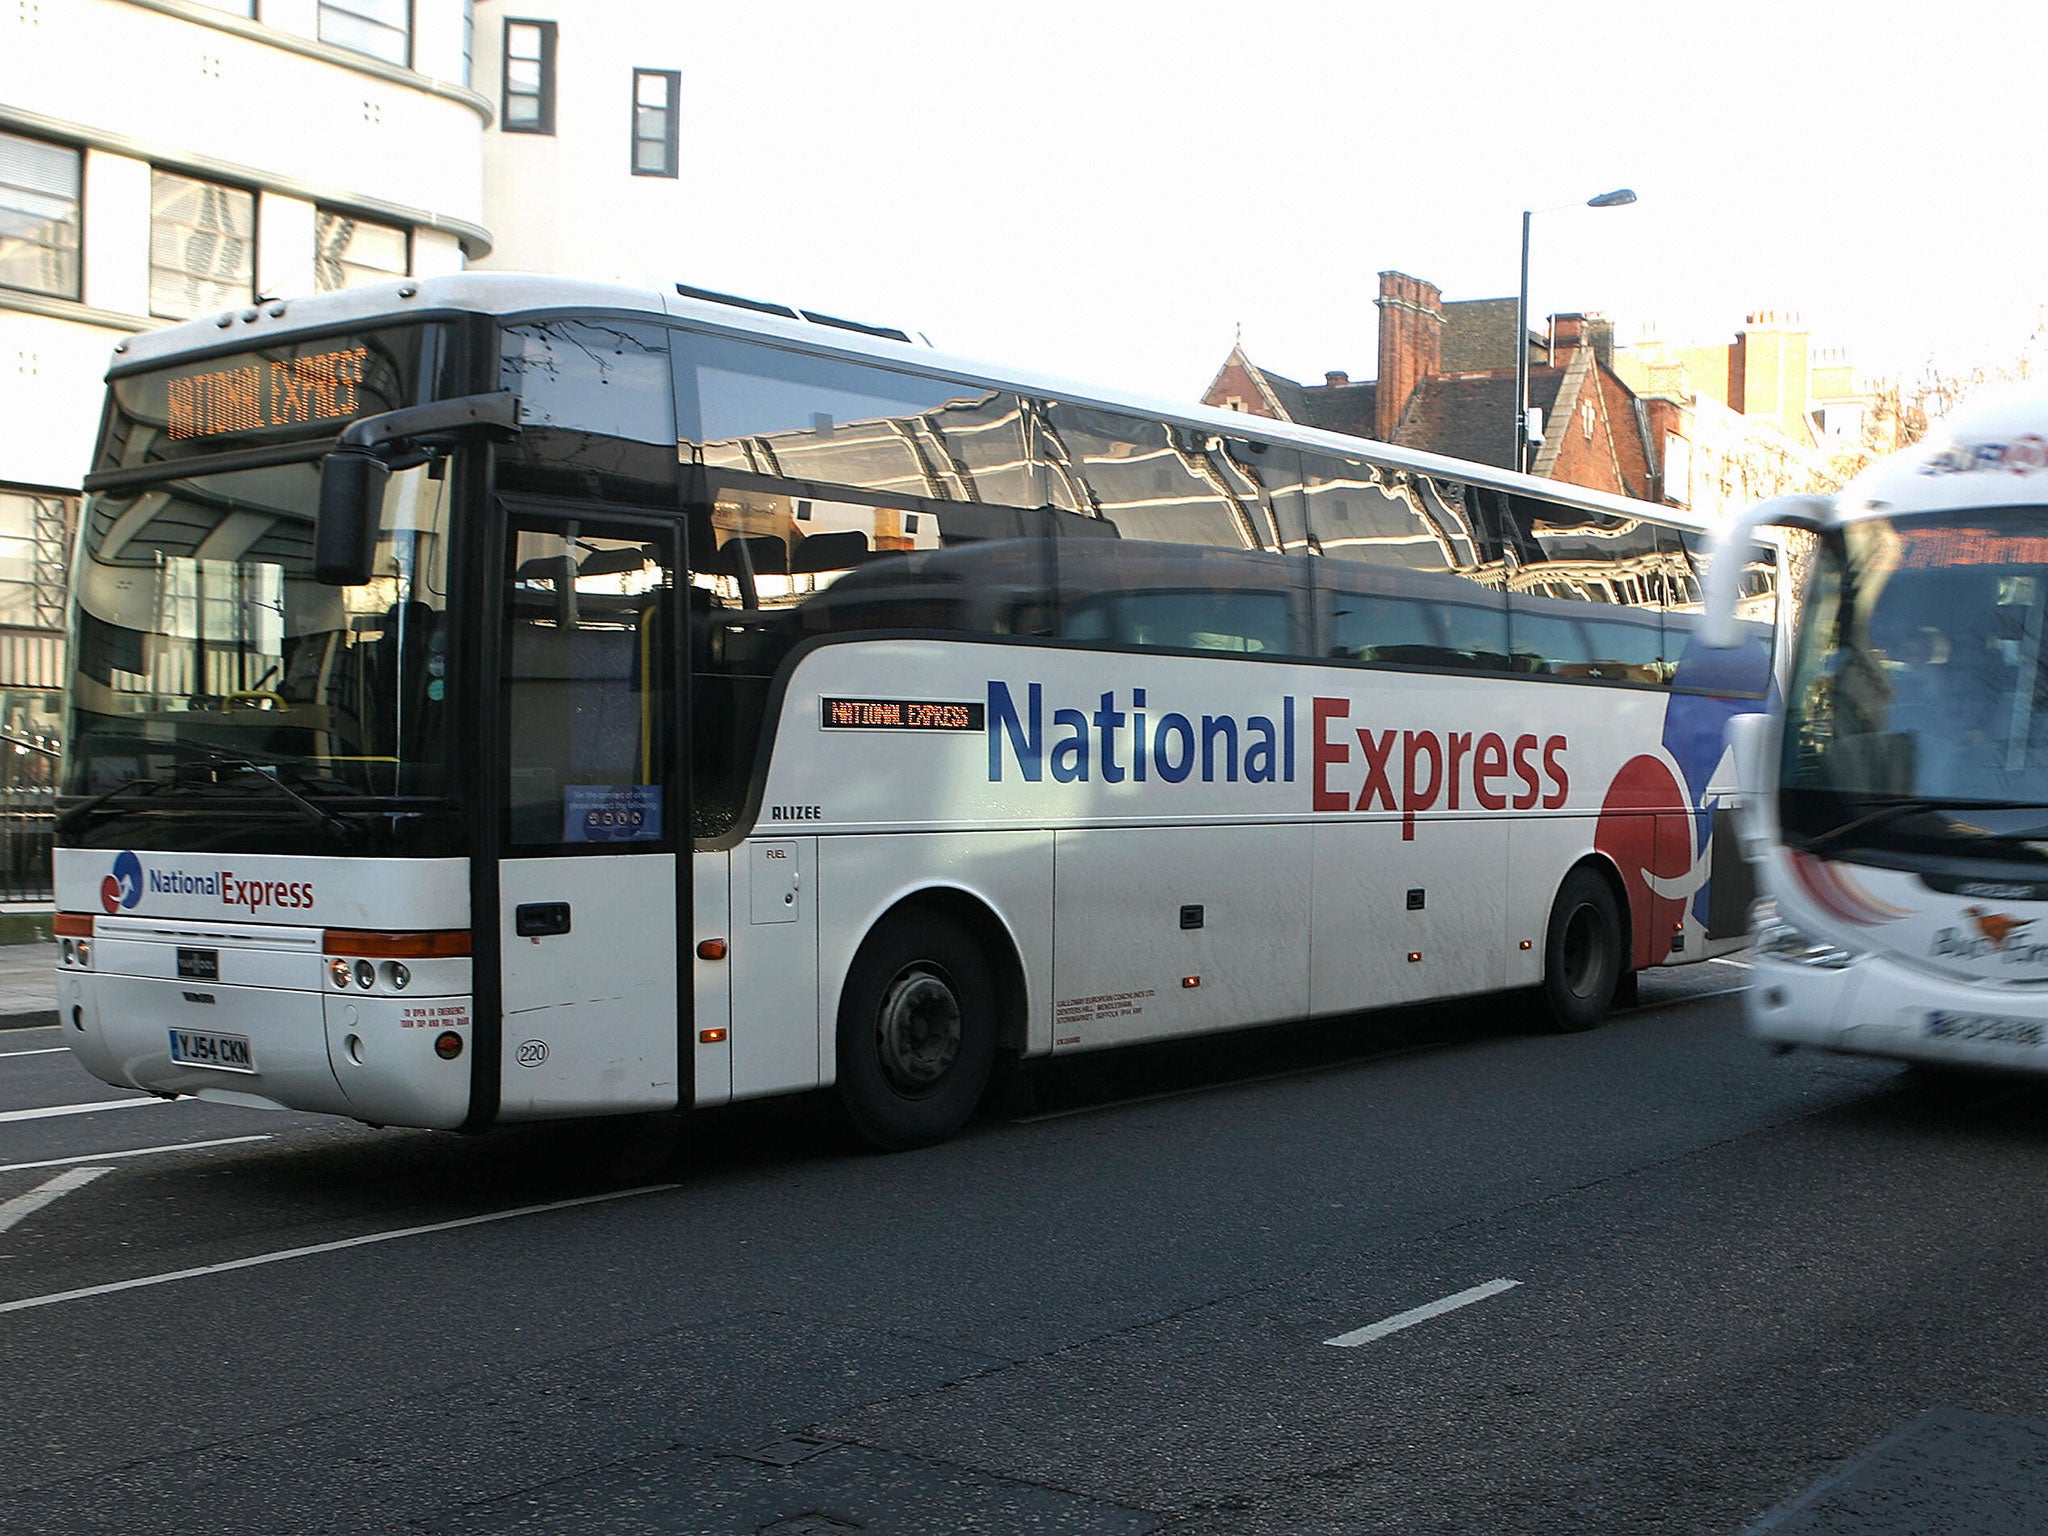 National Express runs long-haul coach services across the country